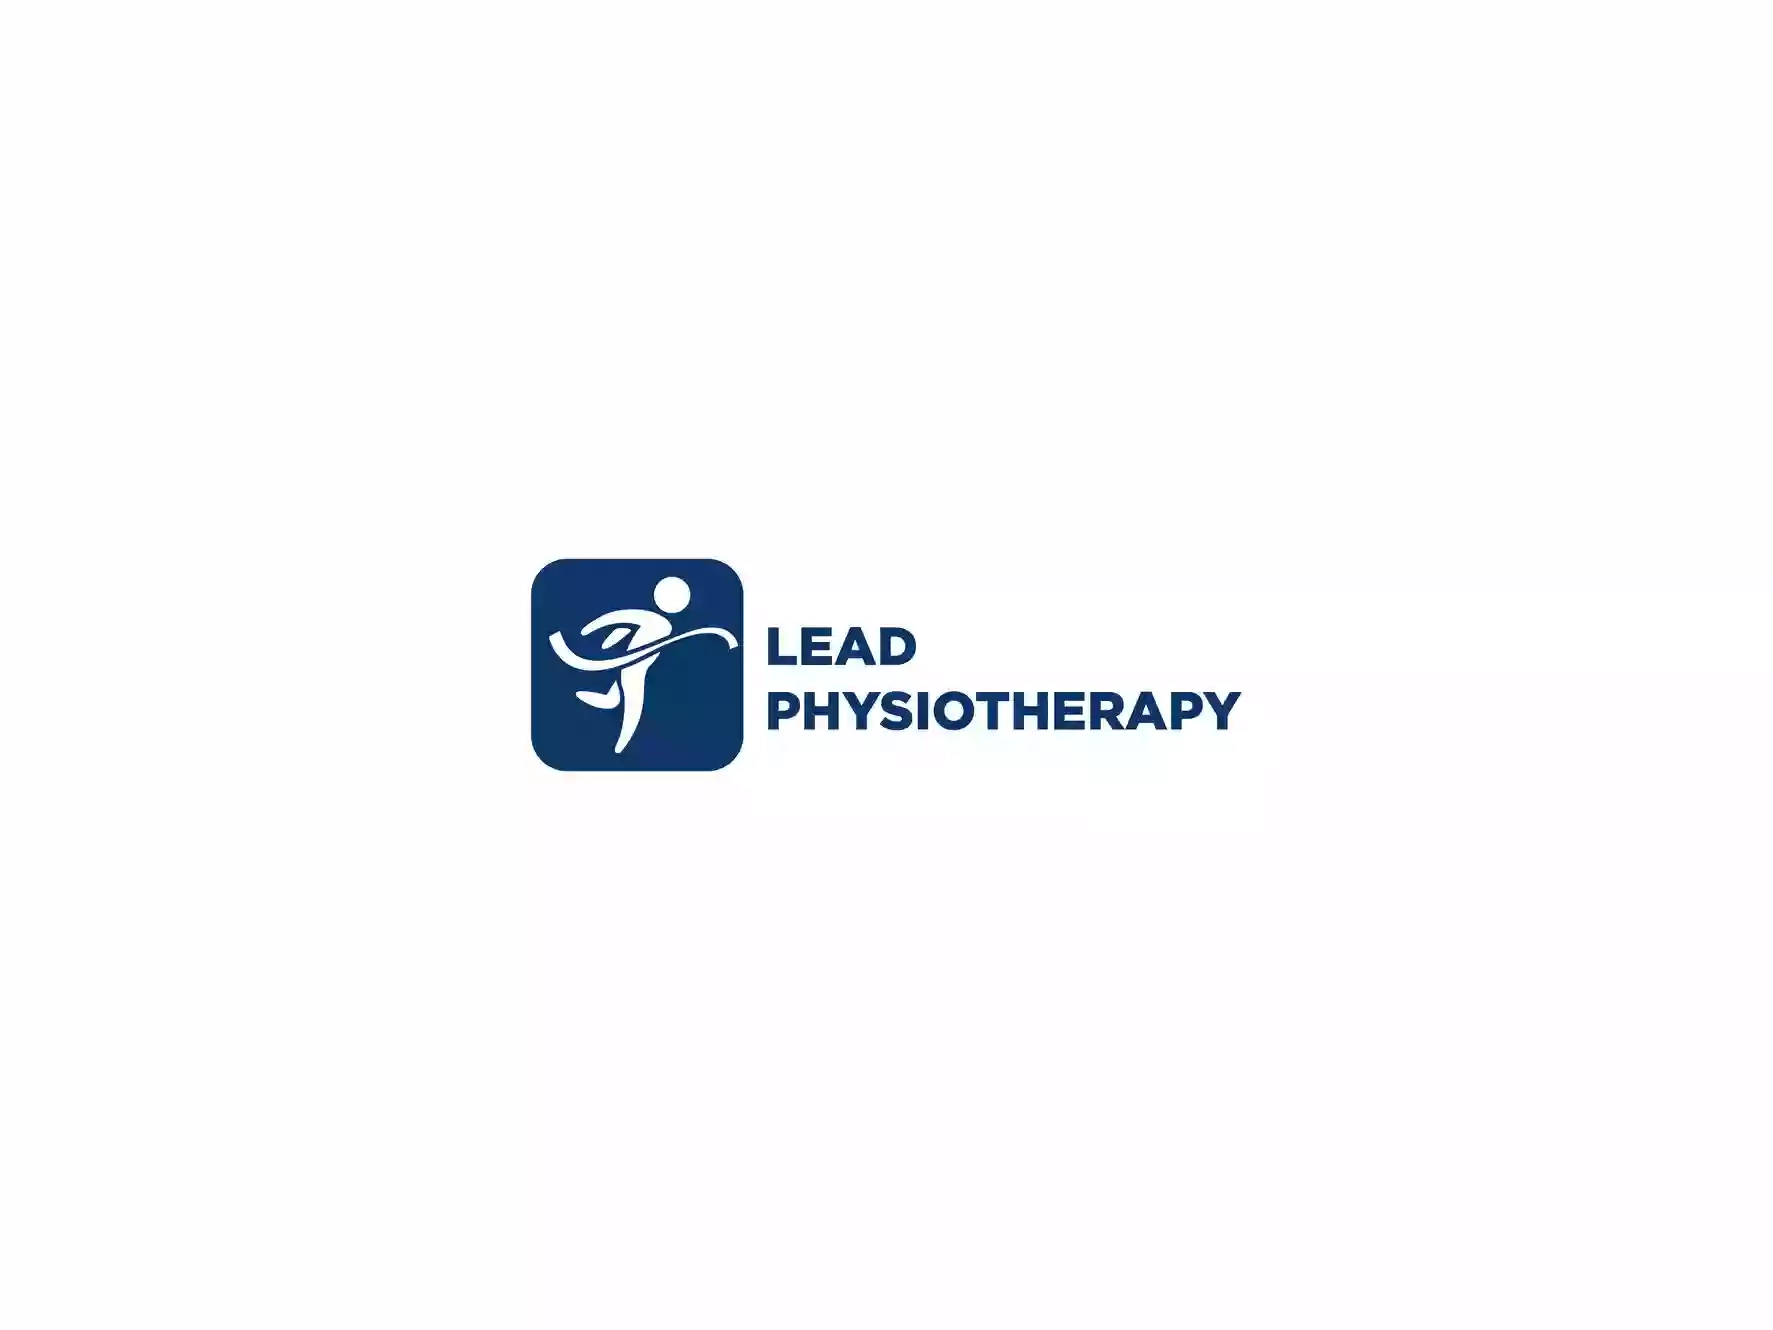 Lead Physiotherapy